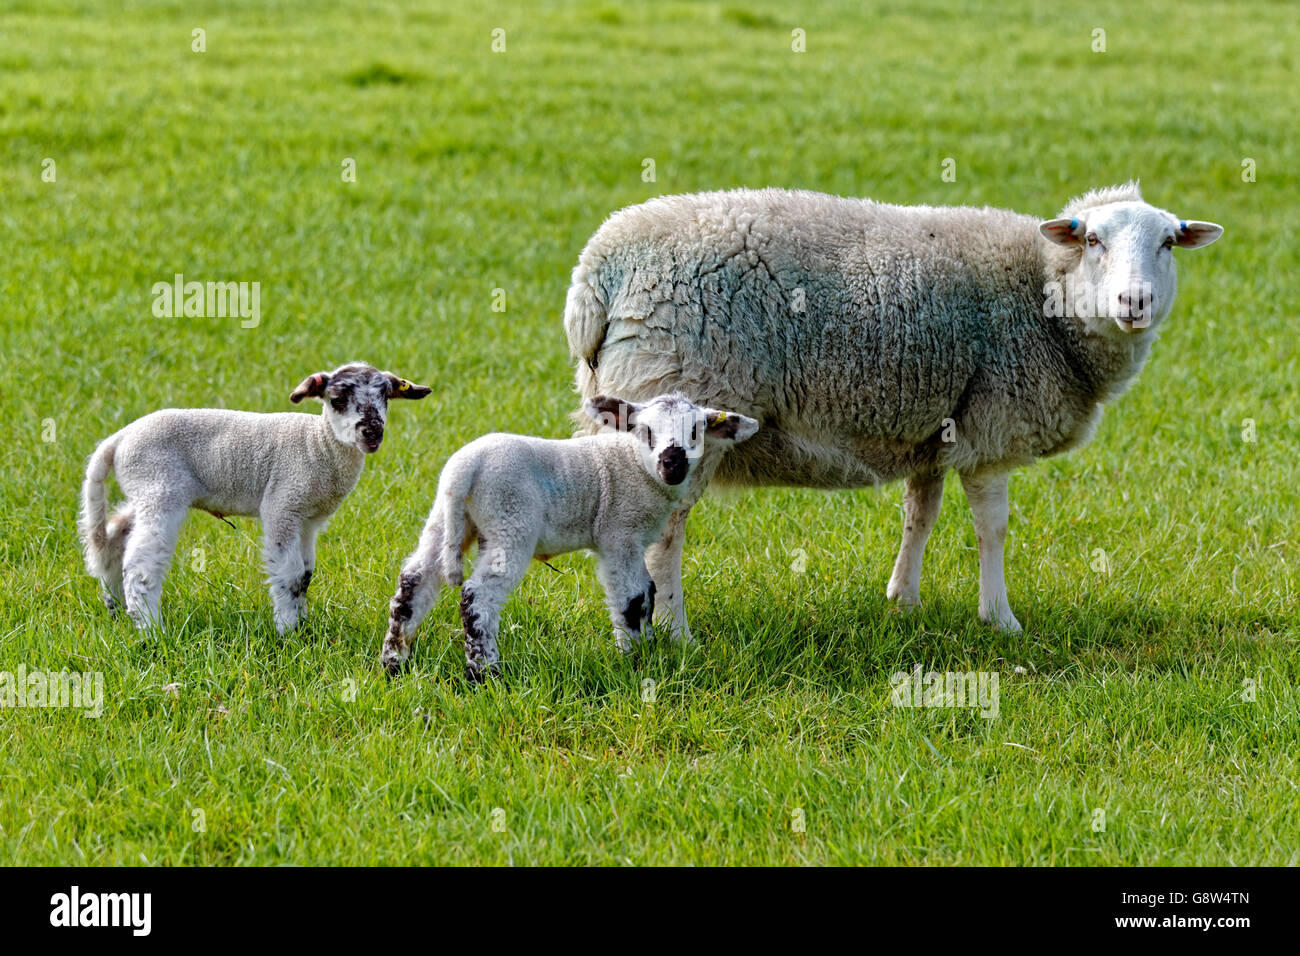 A ewe and her young lambs in a Wiltshire field, United Kingdom. Stock Photo